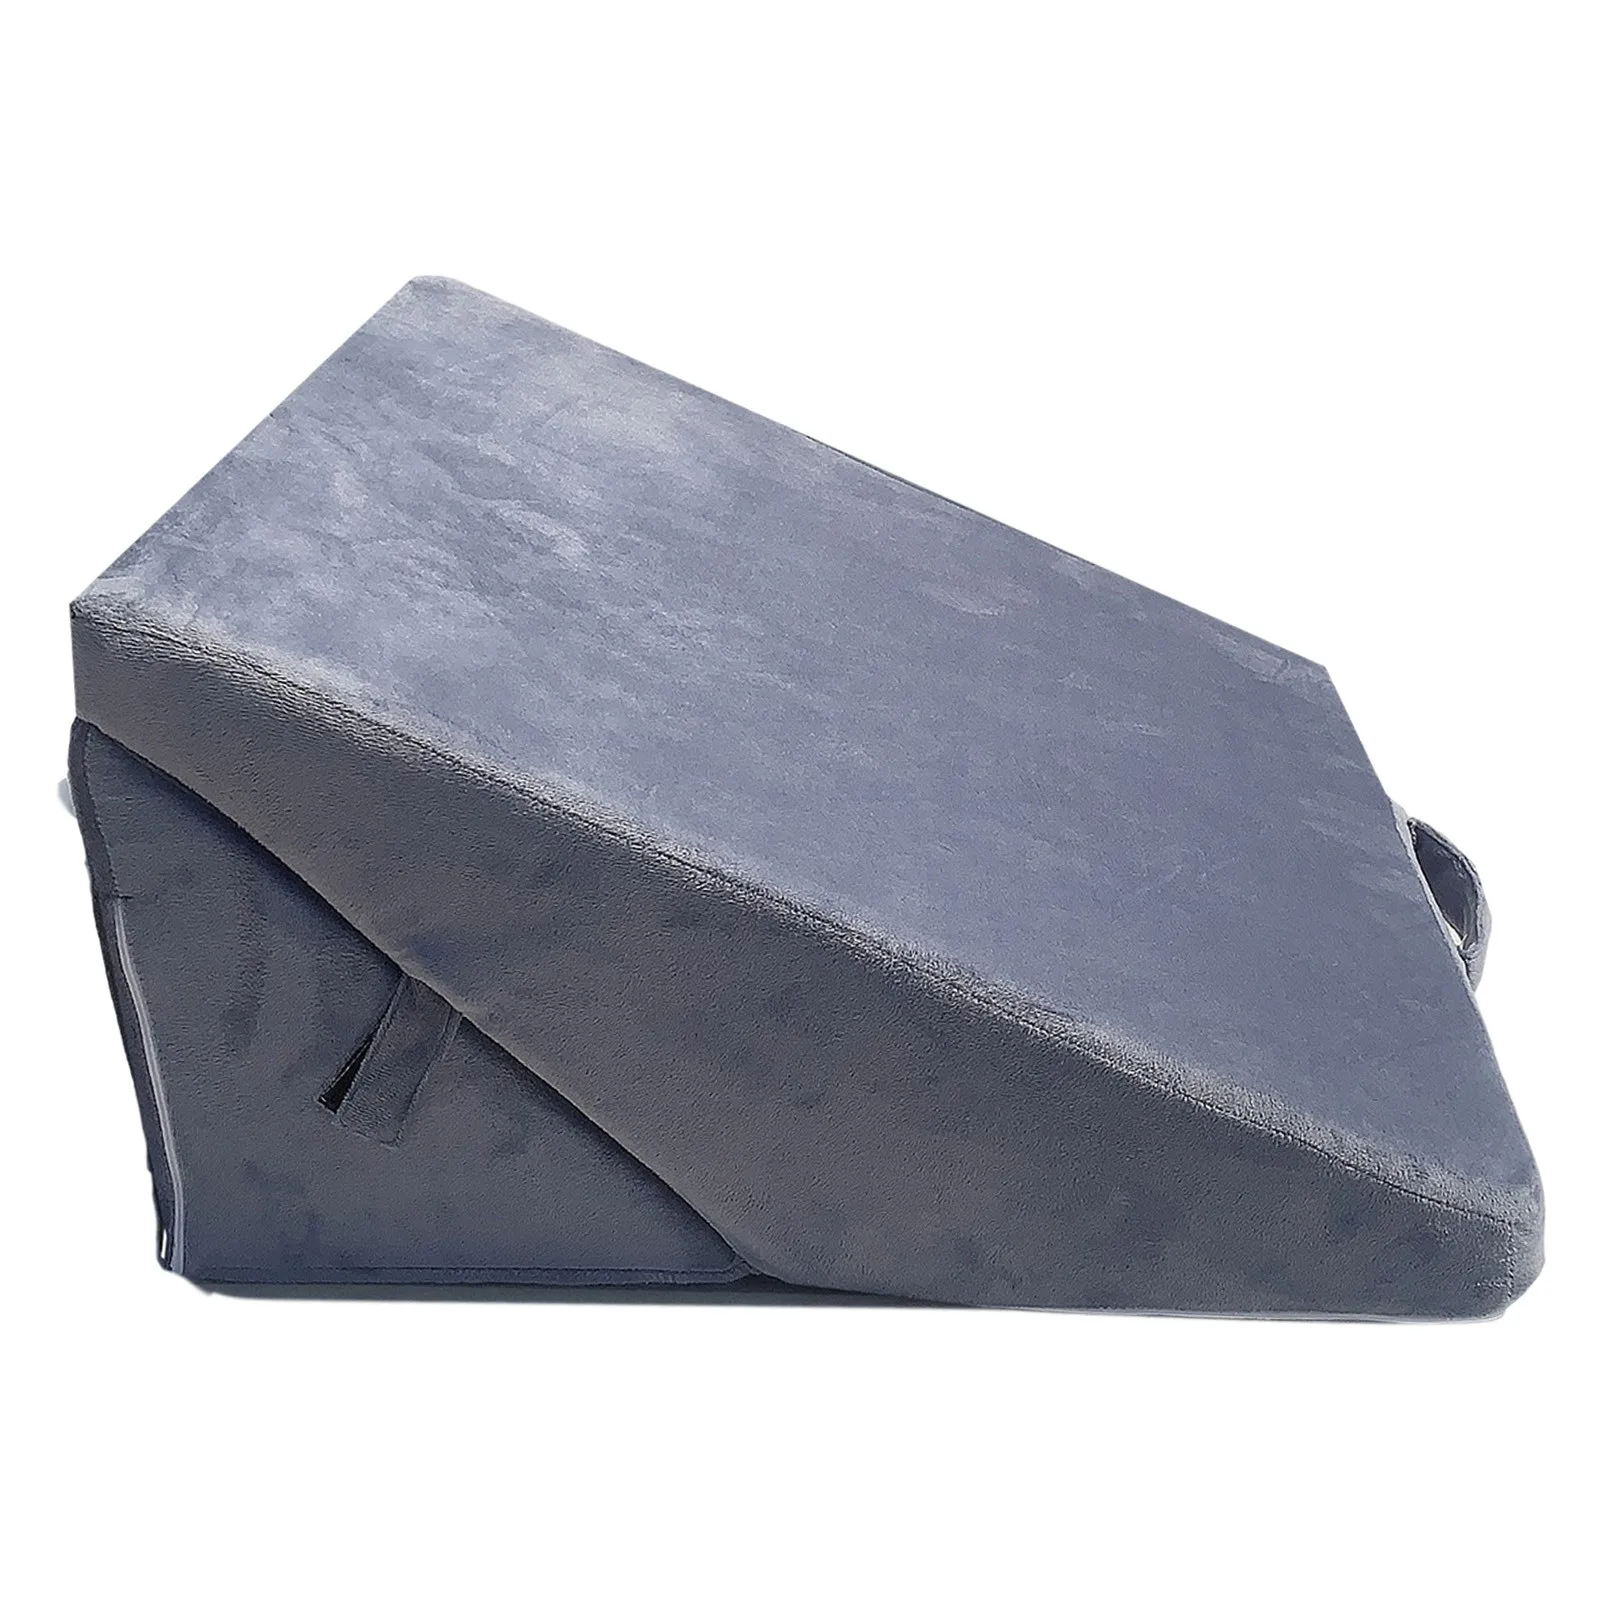 

New Orthopedic Acid Reflux Bed Wedge Pillow Soft Leather Sponge Back Leg Elevation Cushion Pad Triangle Pillow Cover Exceptional